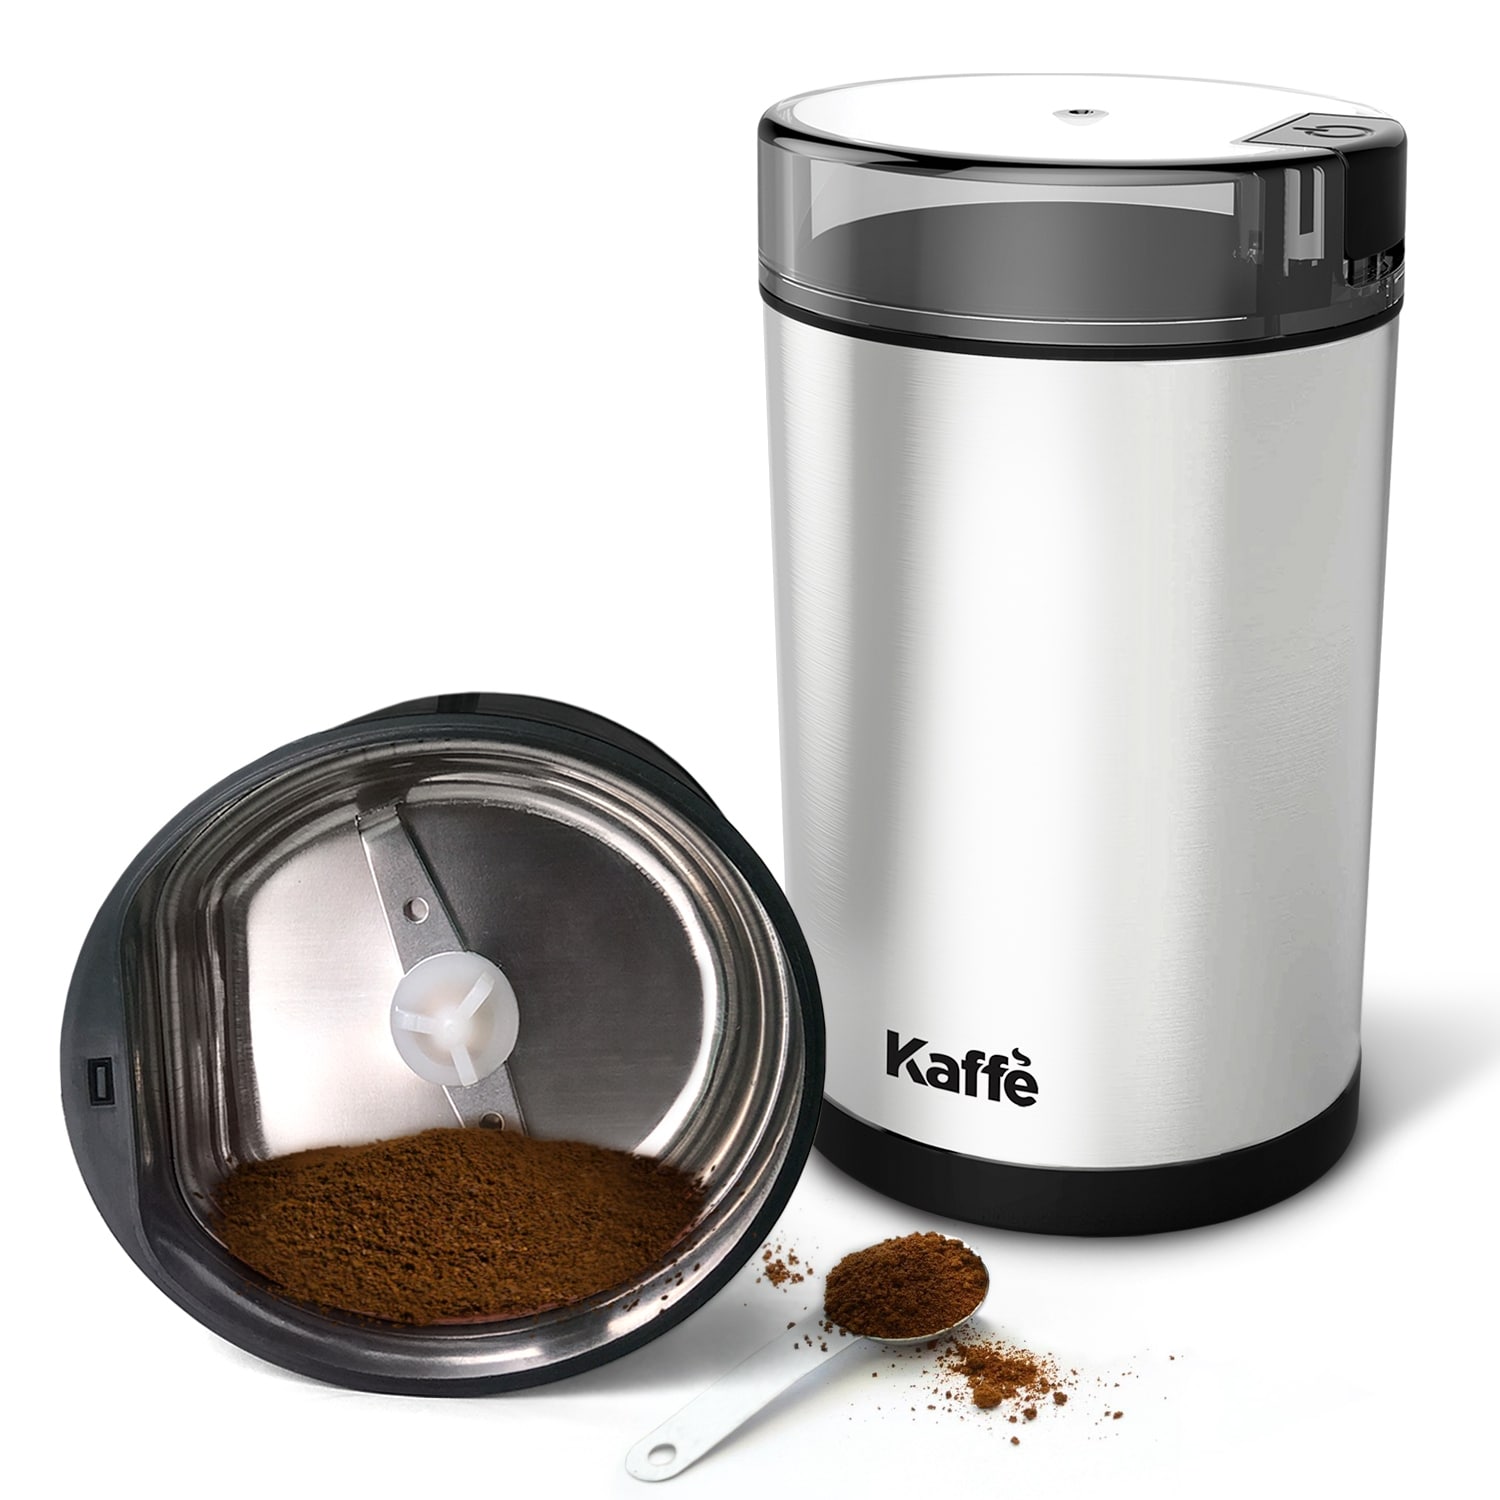 https://ak1.ostkcdn.com/images/products/is/images/direct/d13d9f63a47de3387aaa9e17df567653f98a39ae/Kaffe-Electric-Coffee-Grinder---Stainless-Steel---3oz-Capacity-with-Easy-On-Off-Button.-Cleaning-Brush-Included%21.jpg